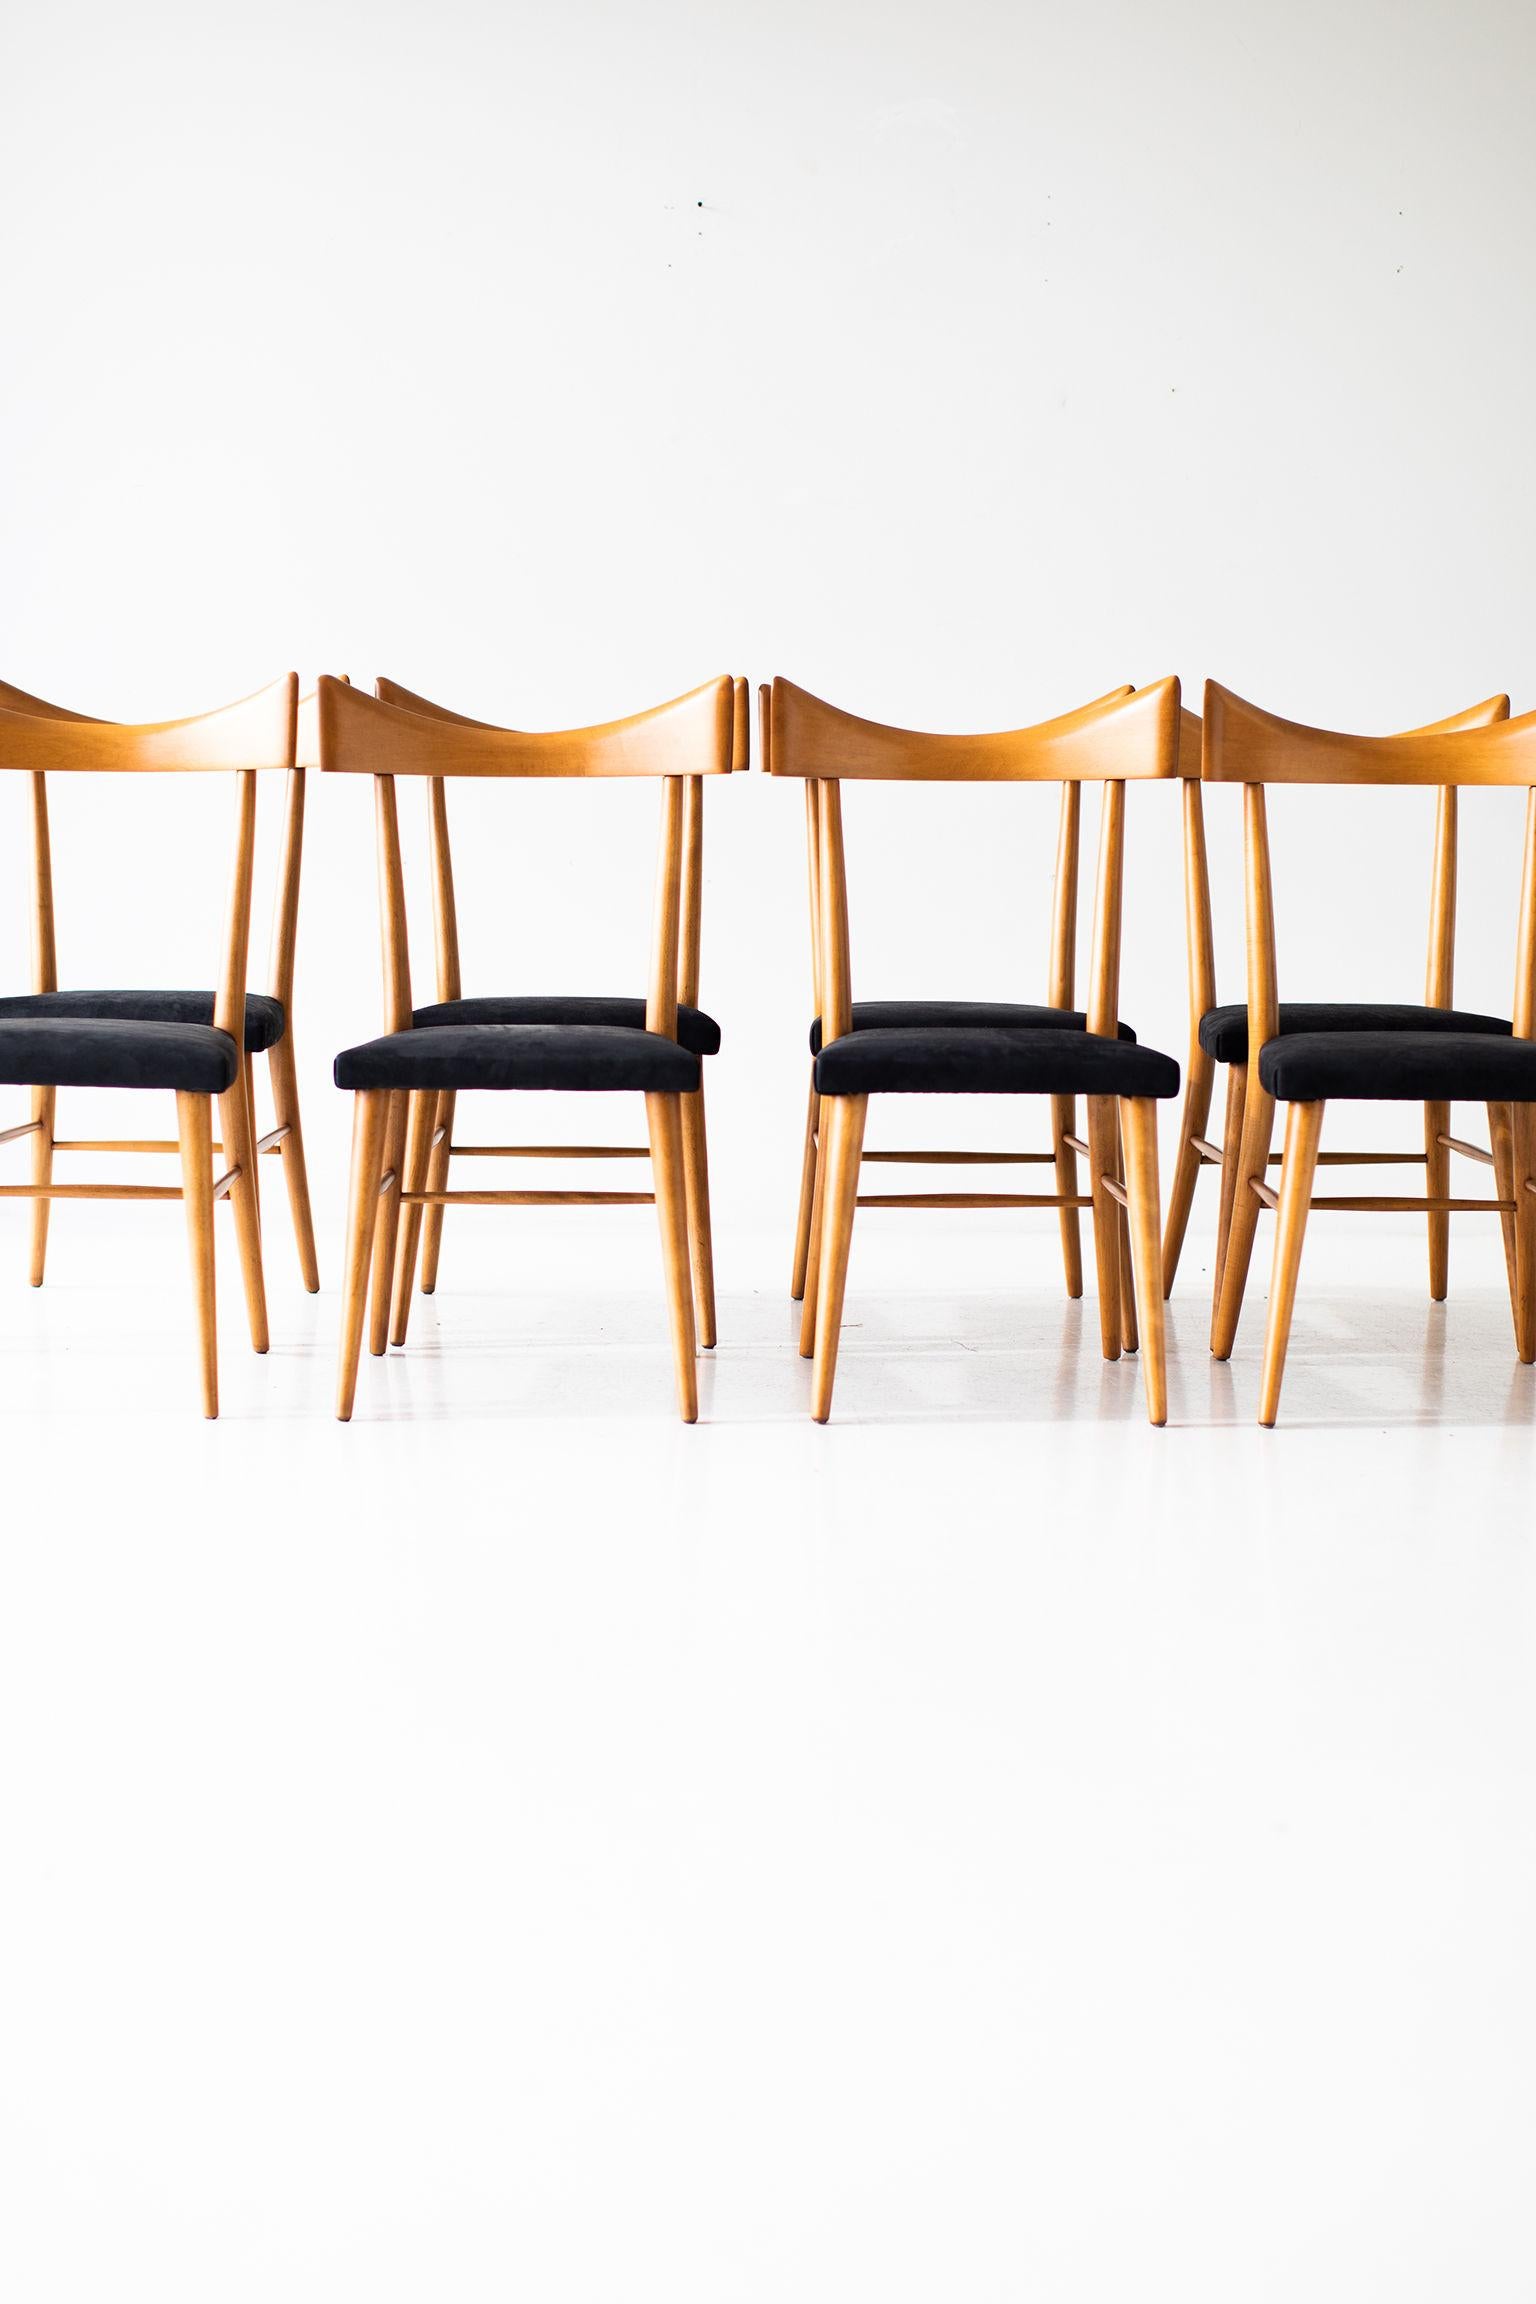 Leather Paul McCobb Planner Group Dining Chairs for Winchendon Furniture